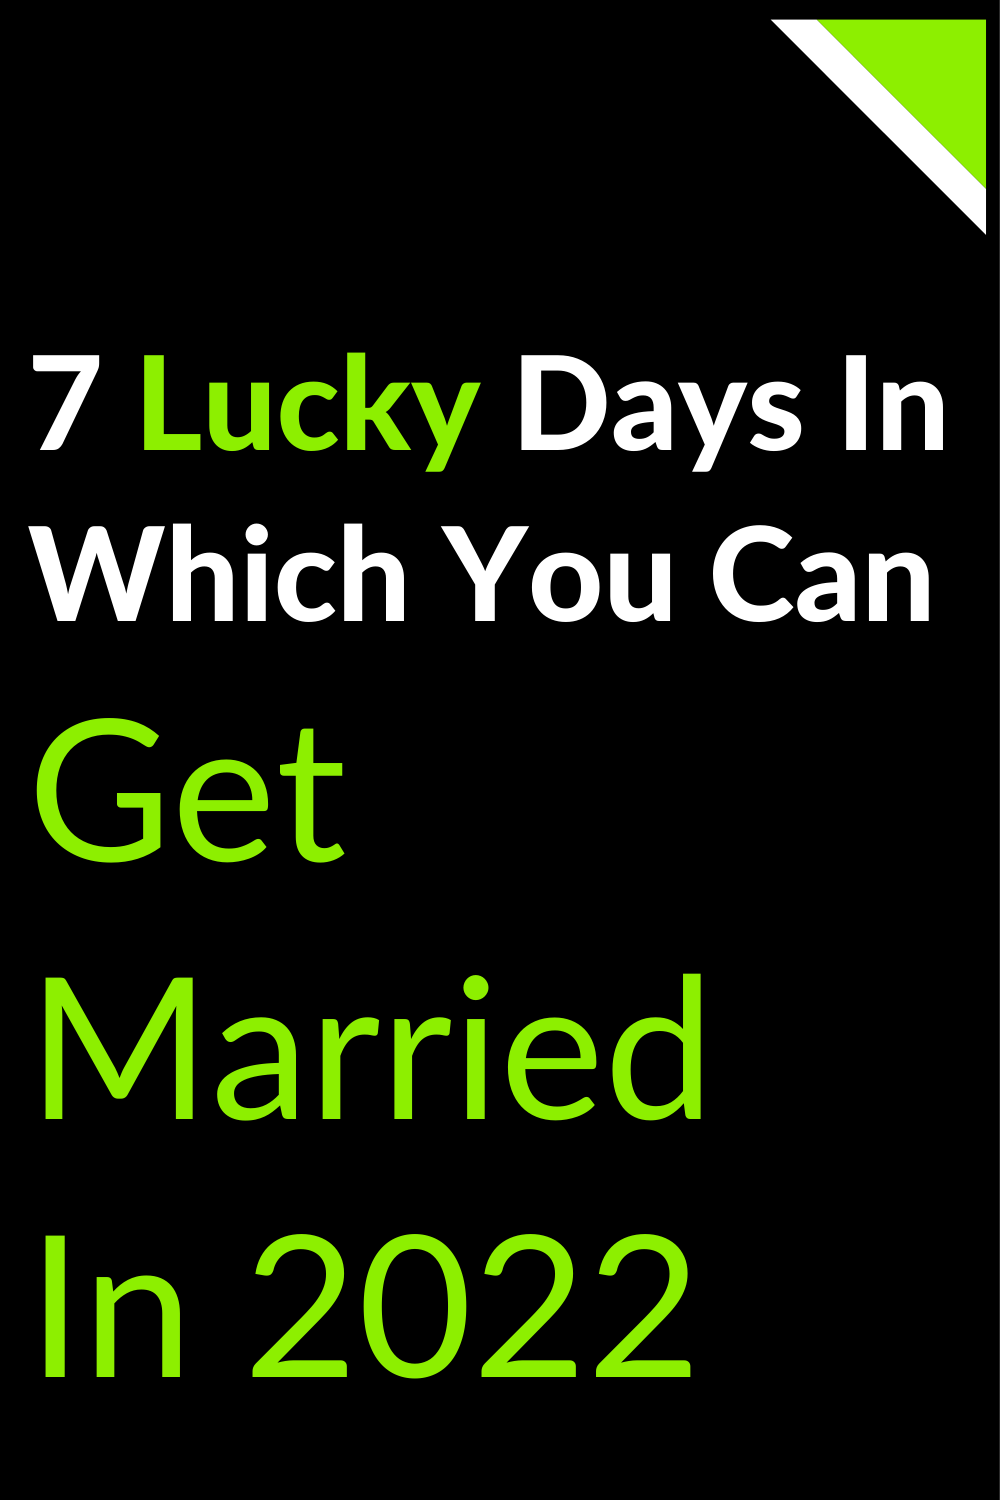 7 Lucky Days In Which You Can Get Married In 2022